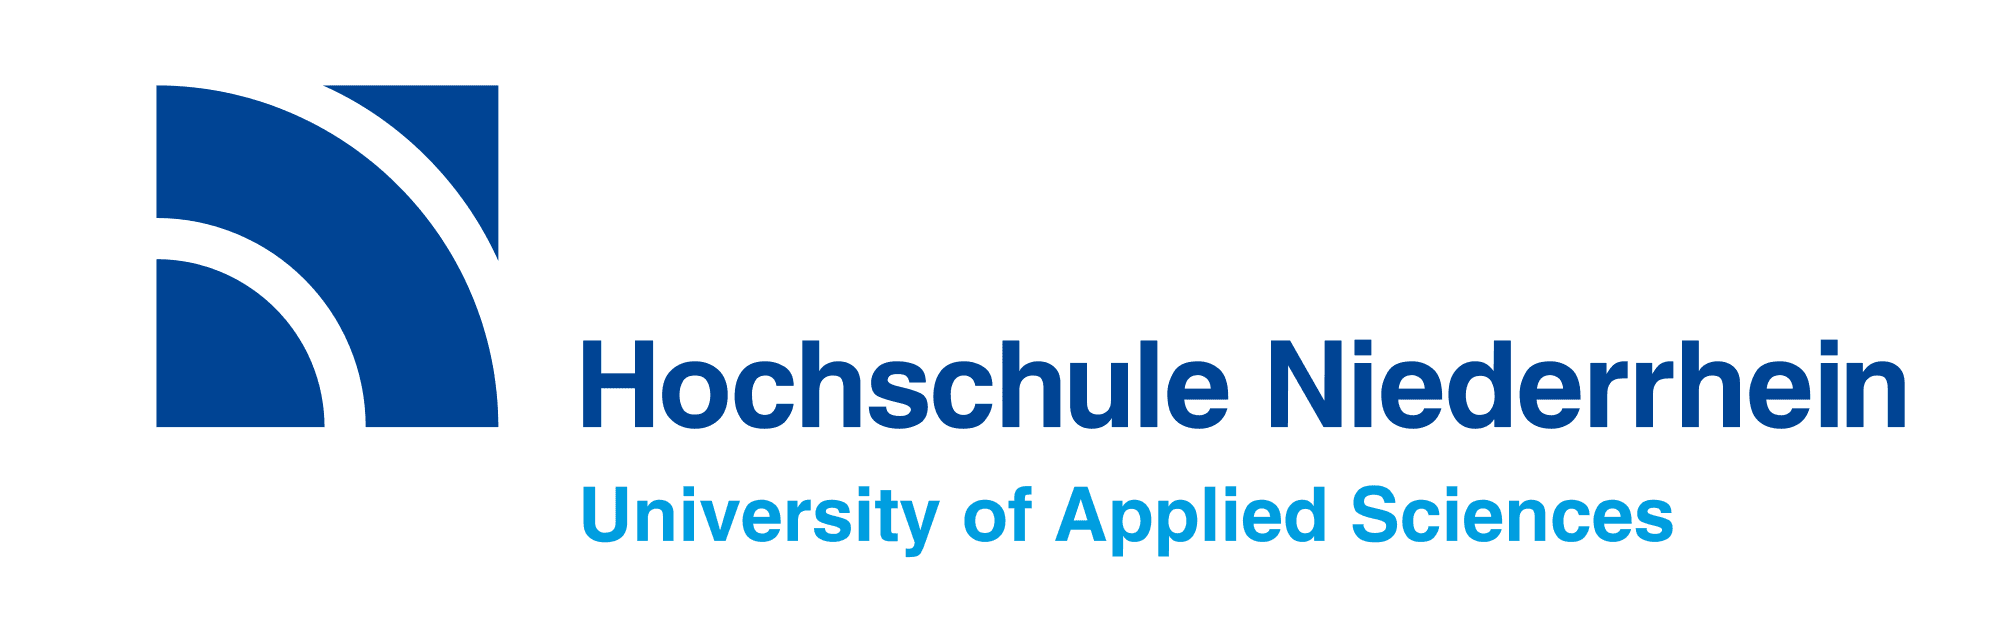 hochschule-niederrhein-university-of-applied-sciences-df5b0a3fdc-cover-picture